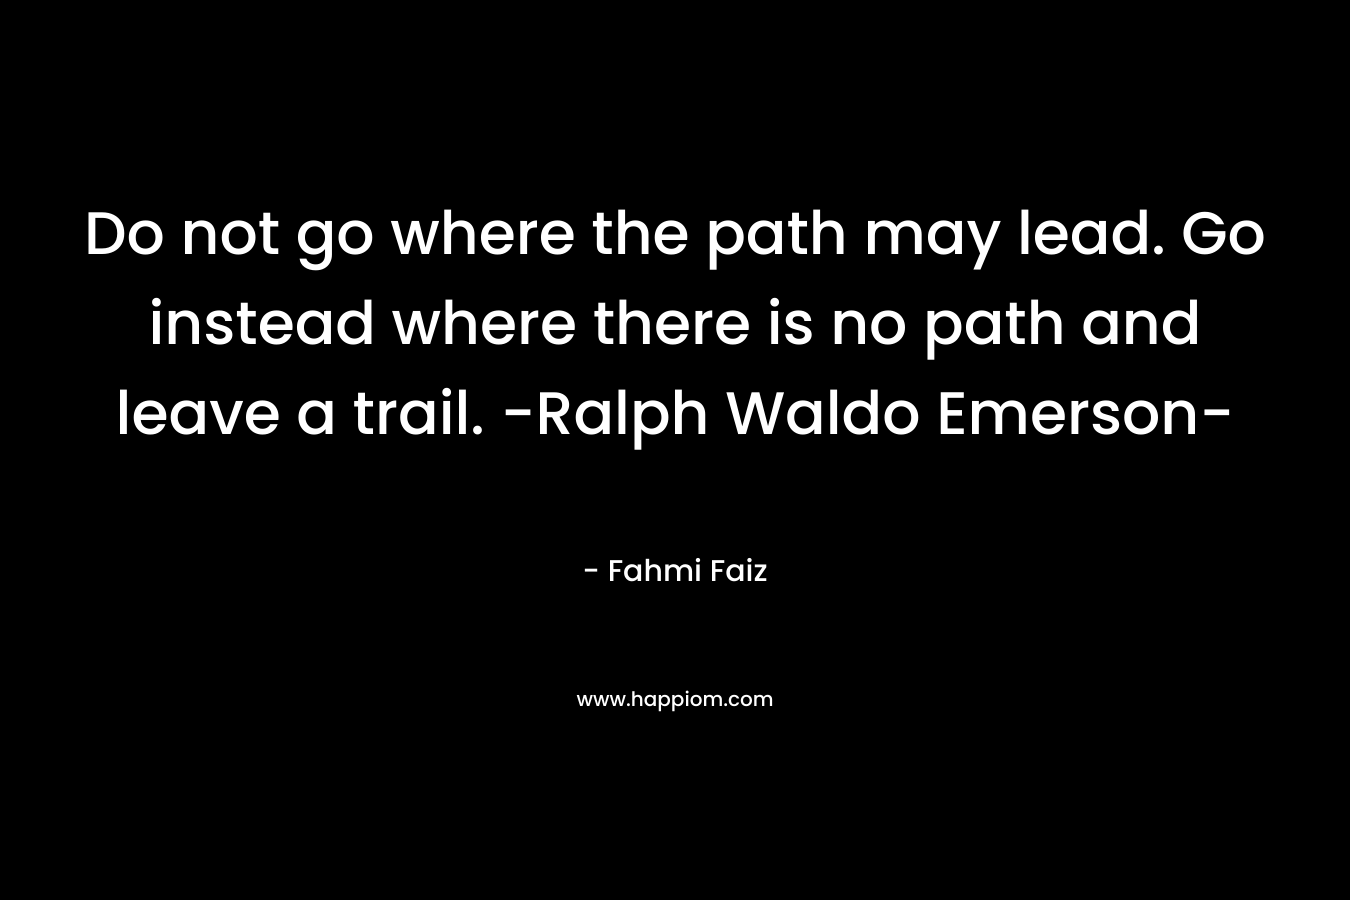 Do not go where the path may lead. Go instead where there is no path and leave a trail. -Ralph Waldo Emerson- – Fahmi Faiz